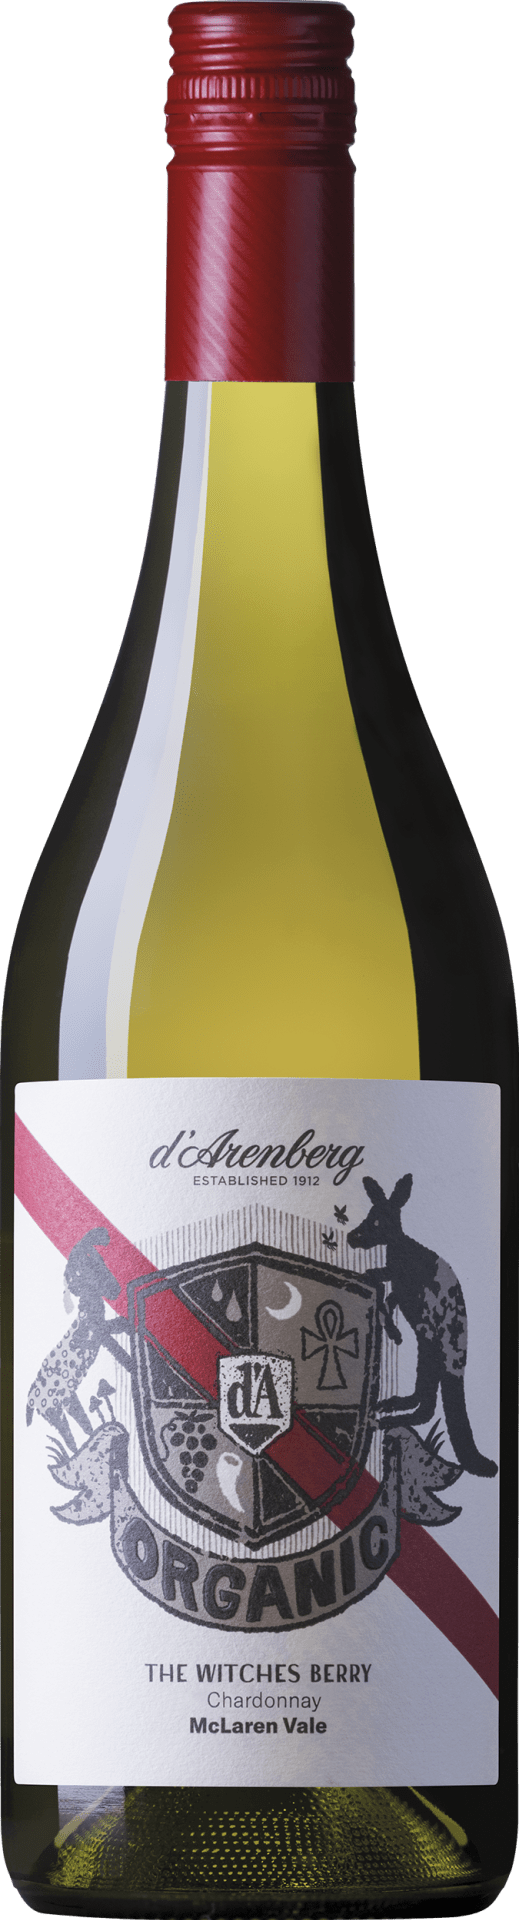 The Witches Berry  d'Arenberg